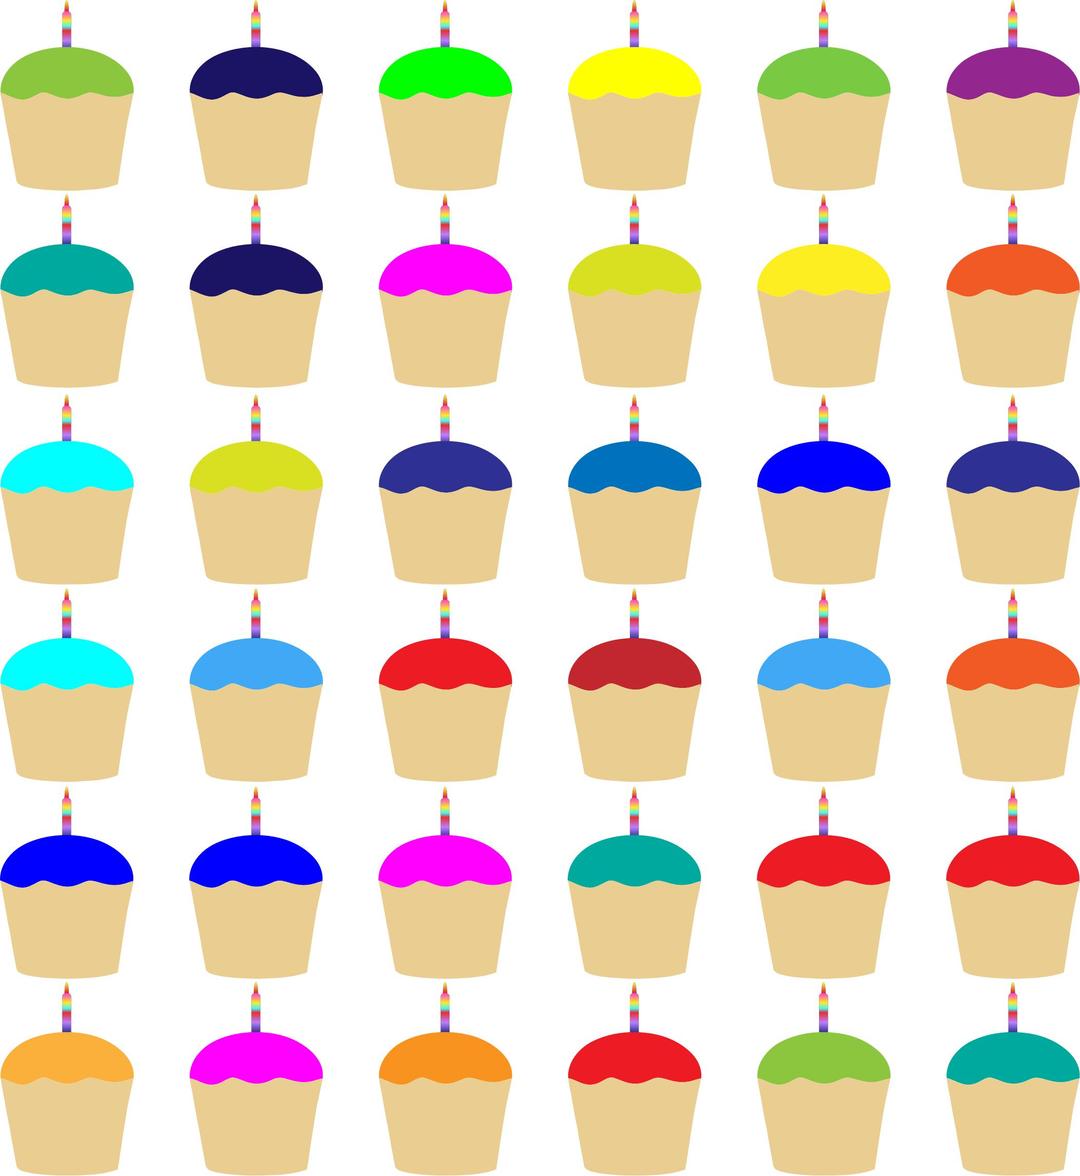 Colorful Cupcakes With Candles Pattern png transparent